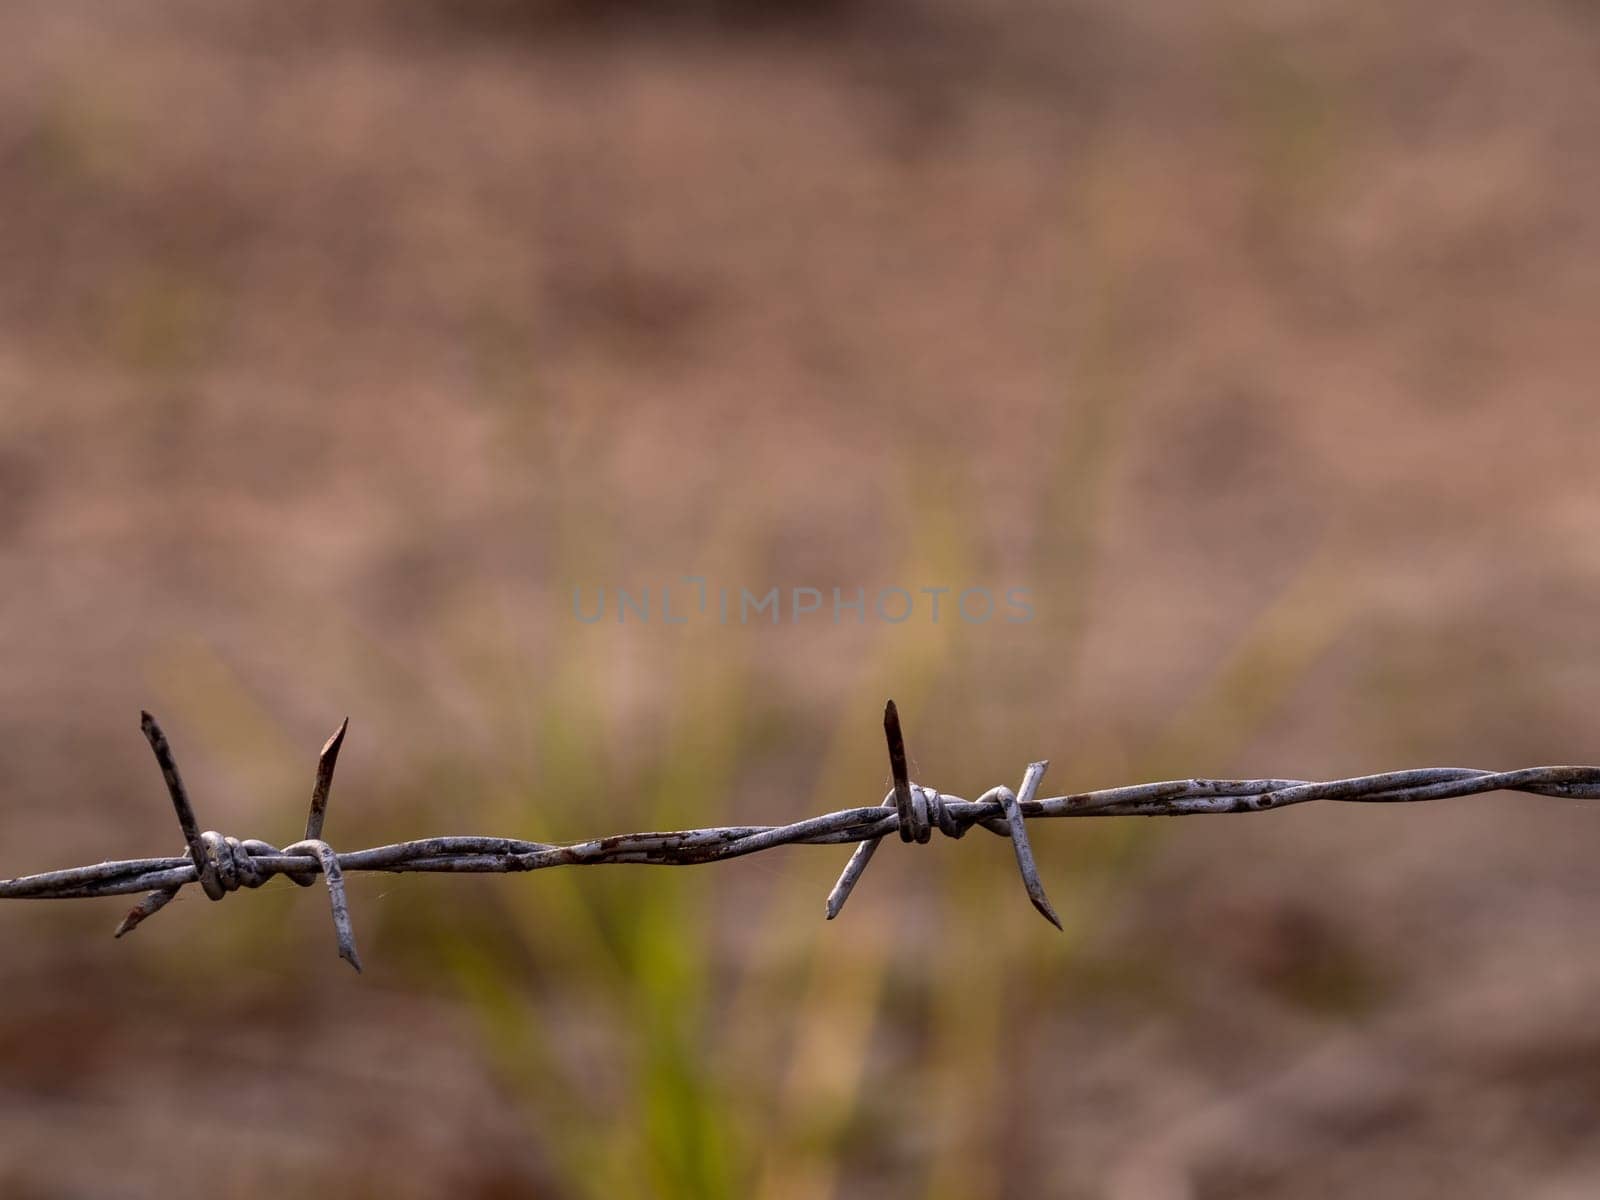 Rusty barbed wire fences are sharp and aggressive by Satakorn